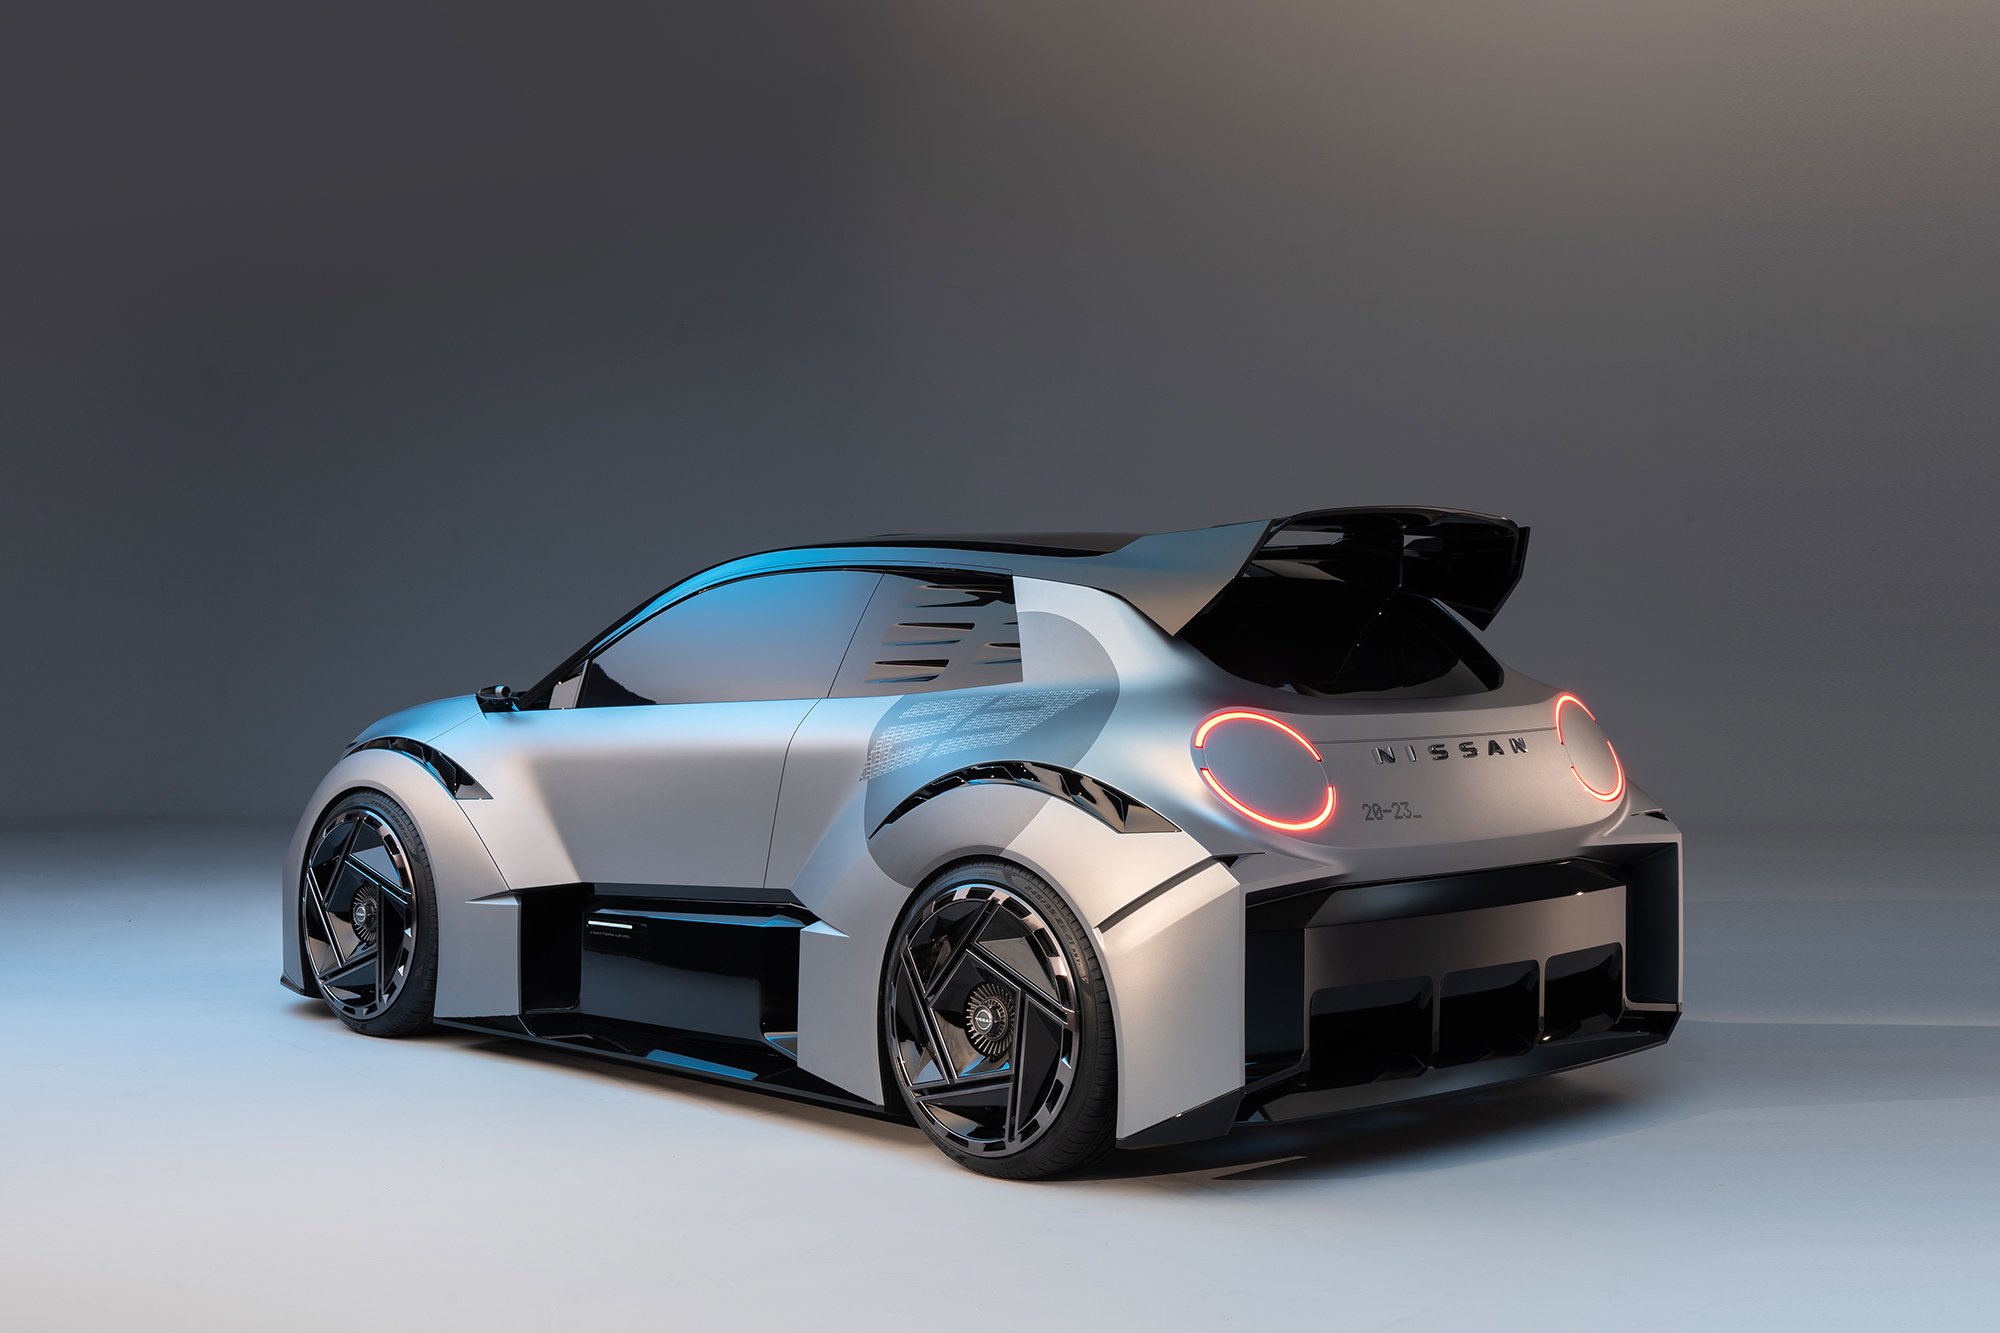 Exterior design of the Nissan Concept 20-23